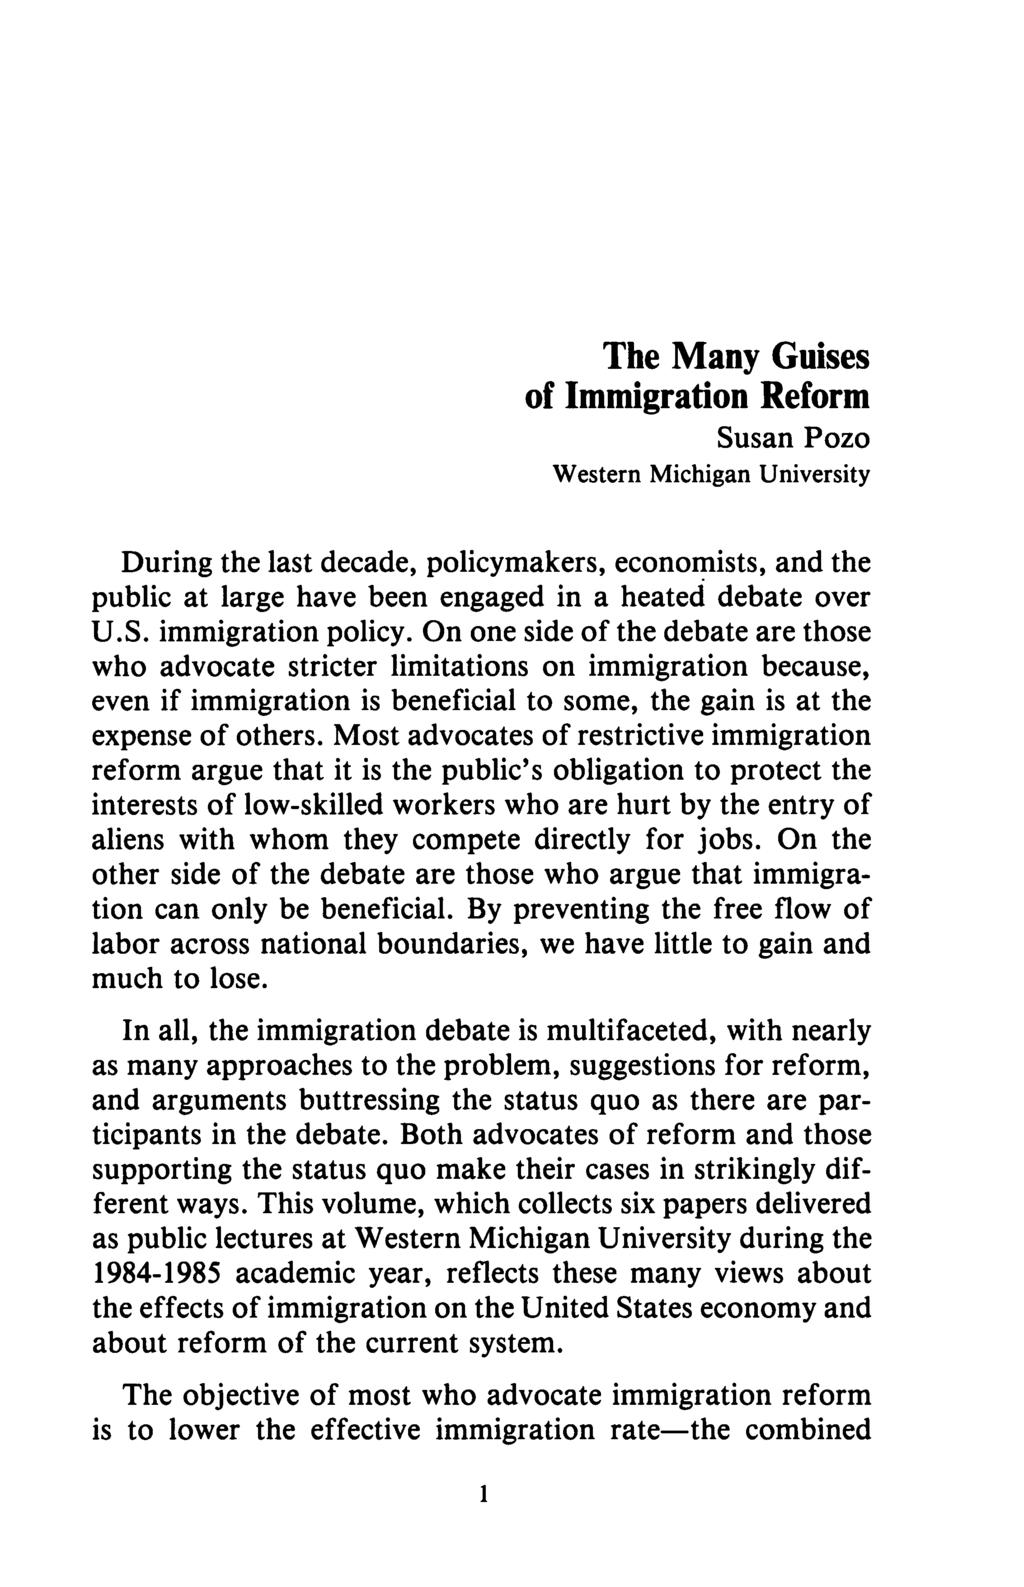 The Many Guises of Immigration Reform Susan Pozo Western Michigan University During the last decade, policymakers, economists, and the public at large have been engaged in a heated debate over U.S. immigration policy.